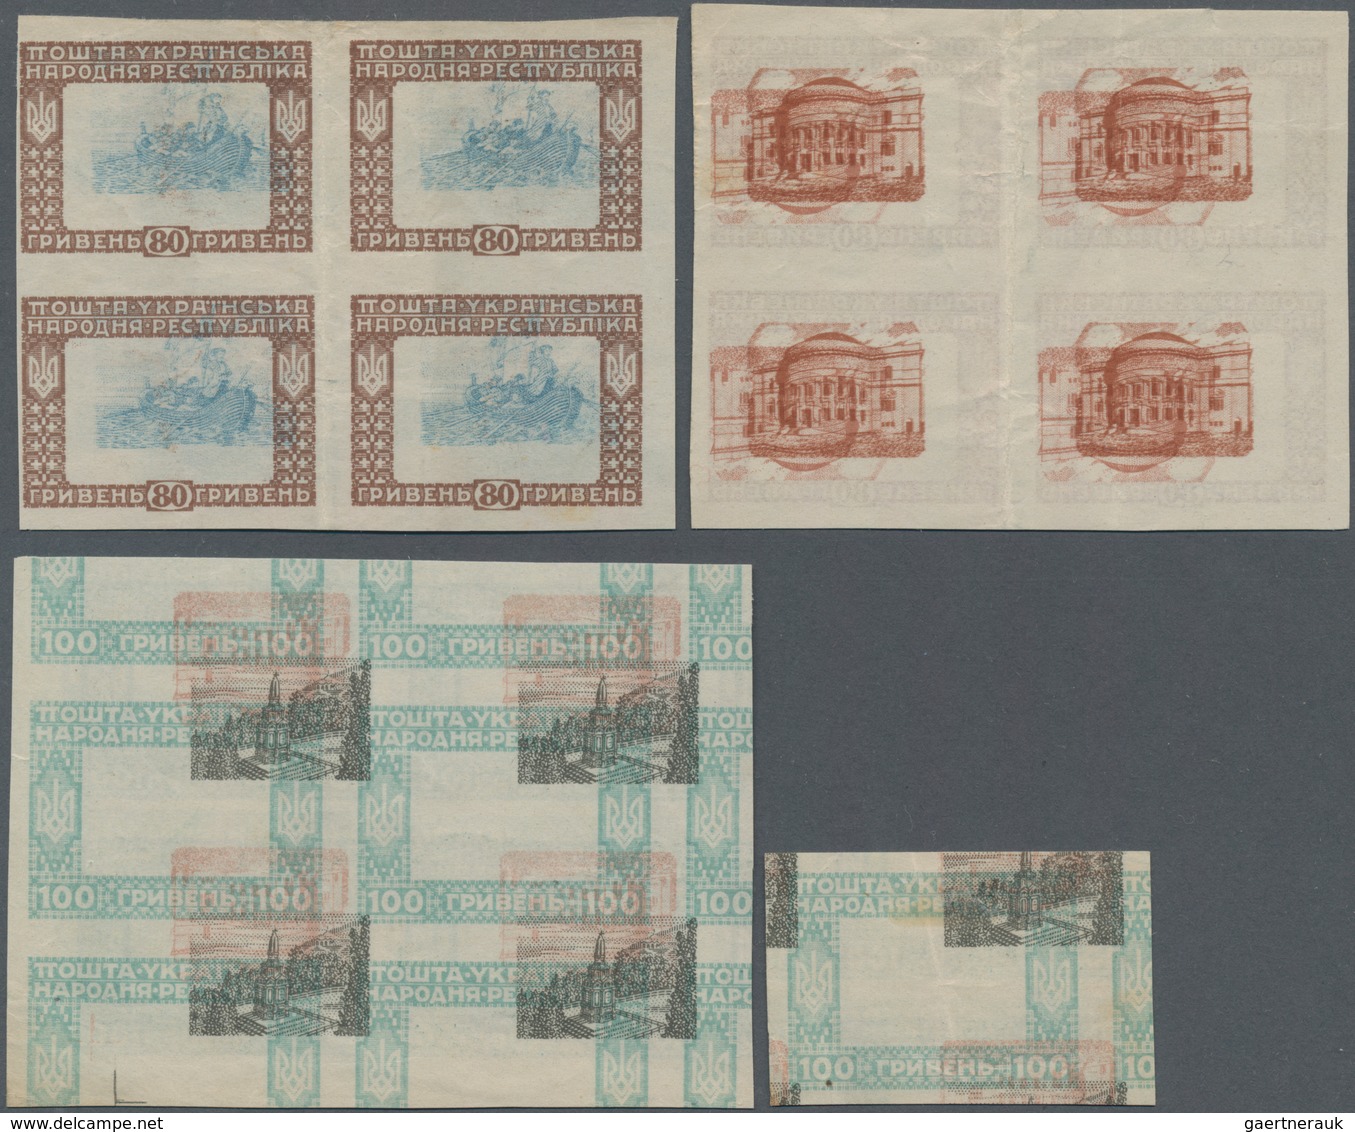 Ukraine: 1920. Definitives. Prepared But Not Issued. VARIETIES. Values Of 80g Brown And Blue (ship) - Ukraine